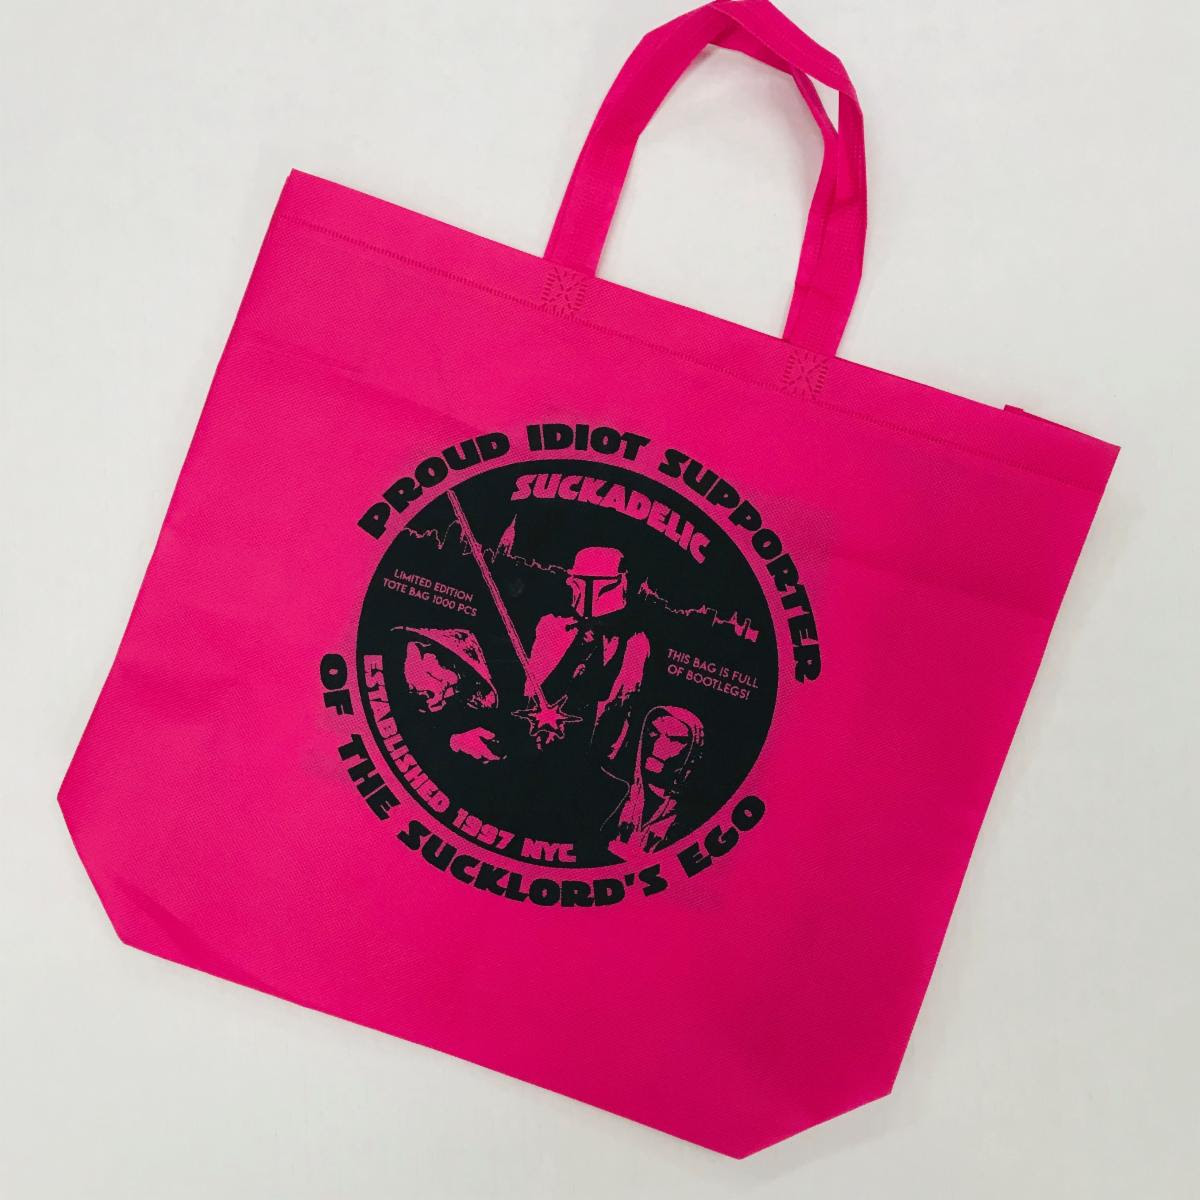 Free Suckadelic tote bag with purchase!